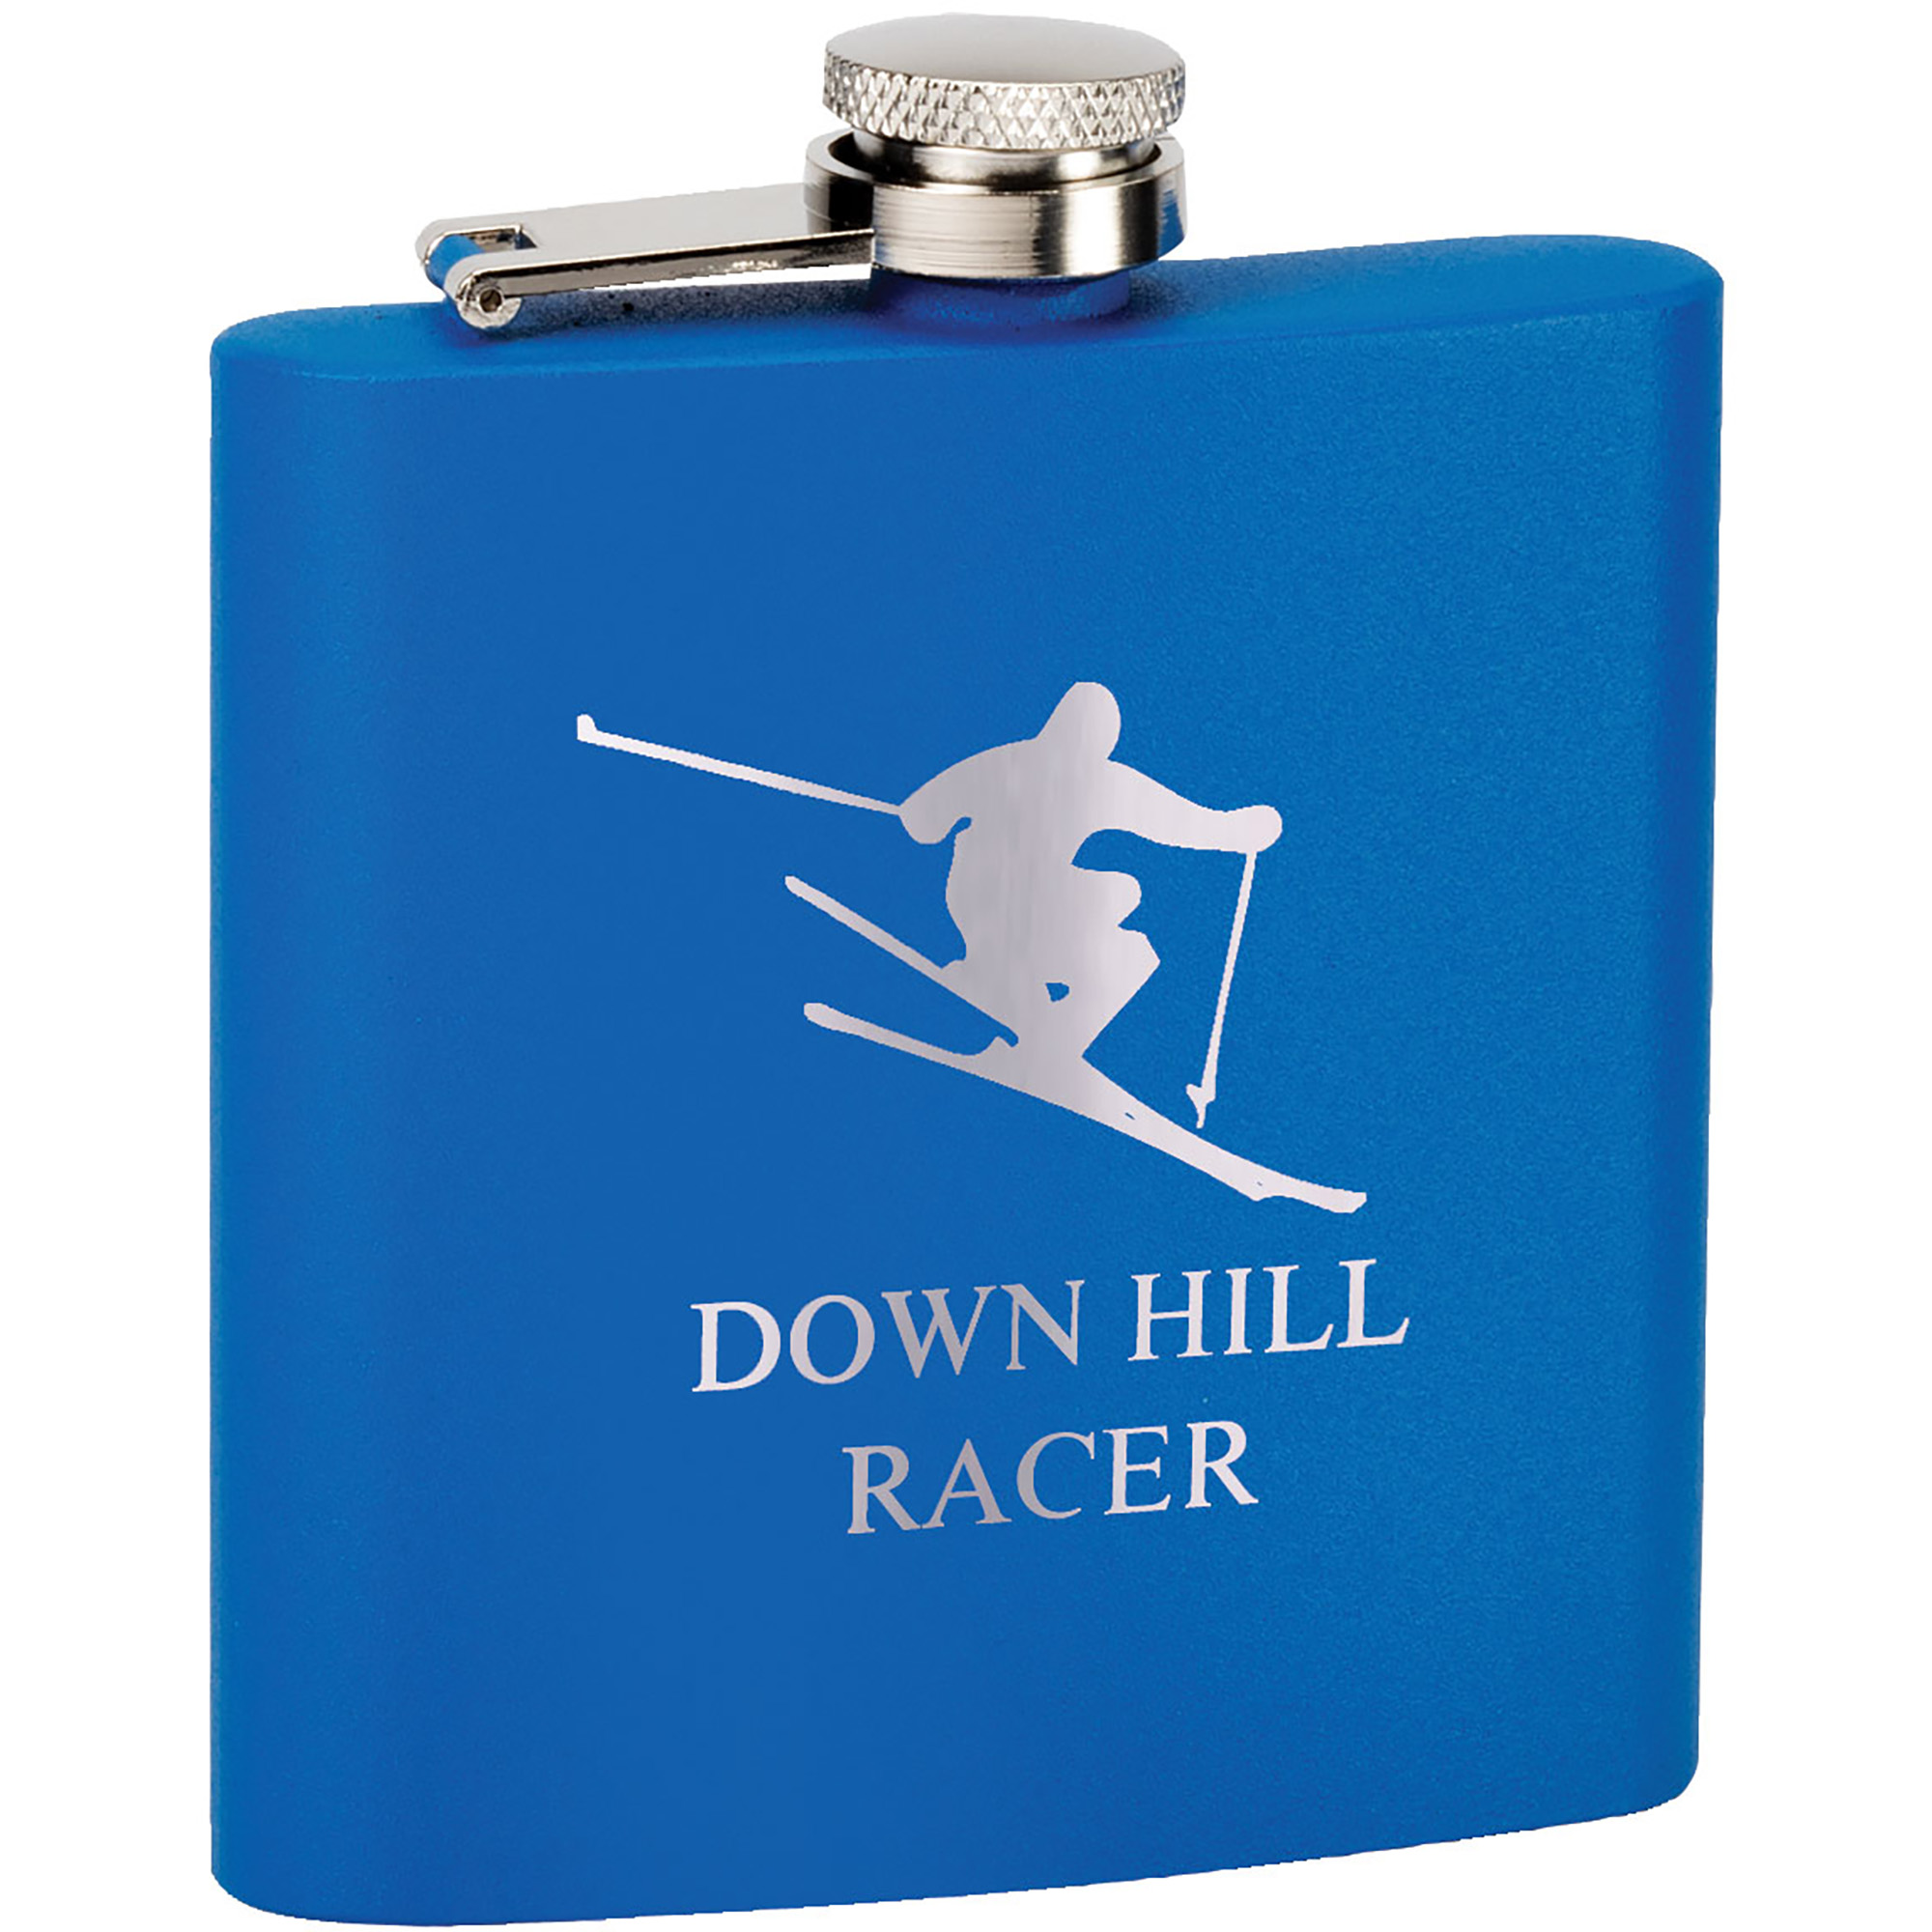 Tahoe© Powder Coated Insulated 6 oz Flask - Royal Blue